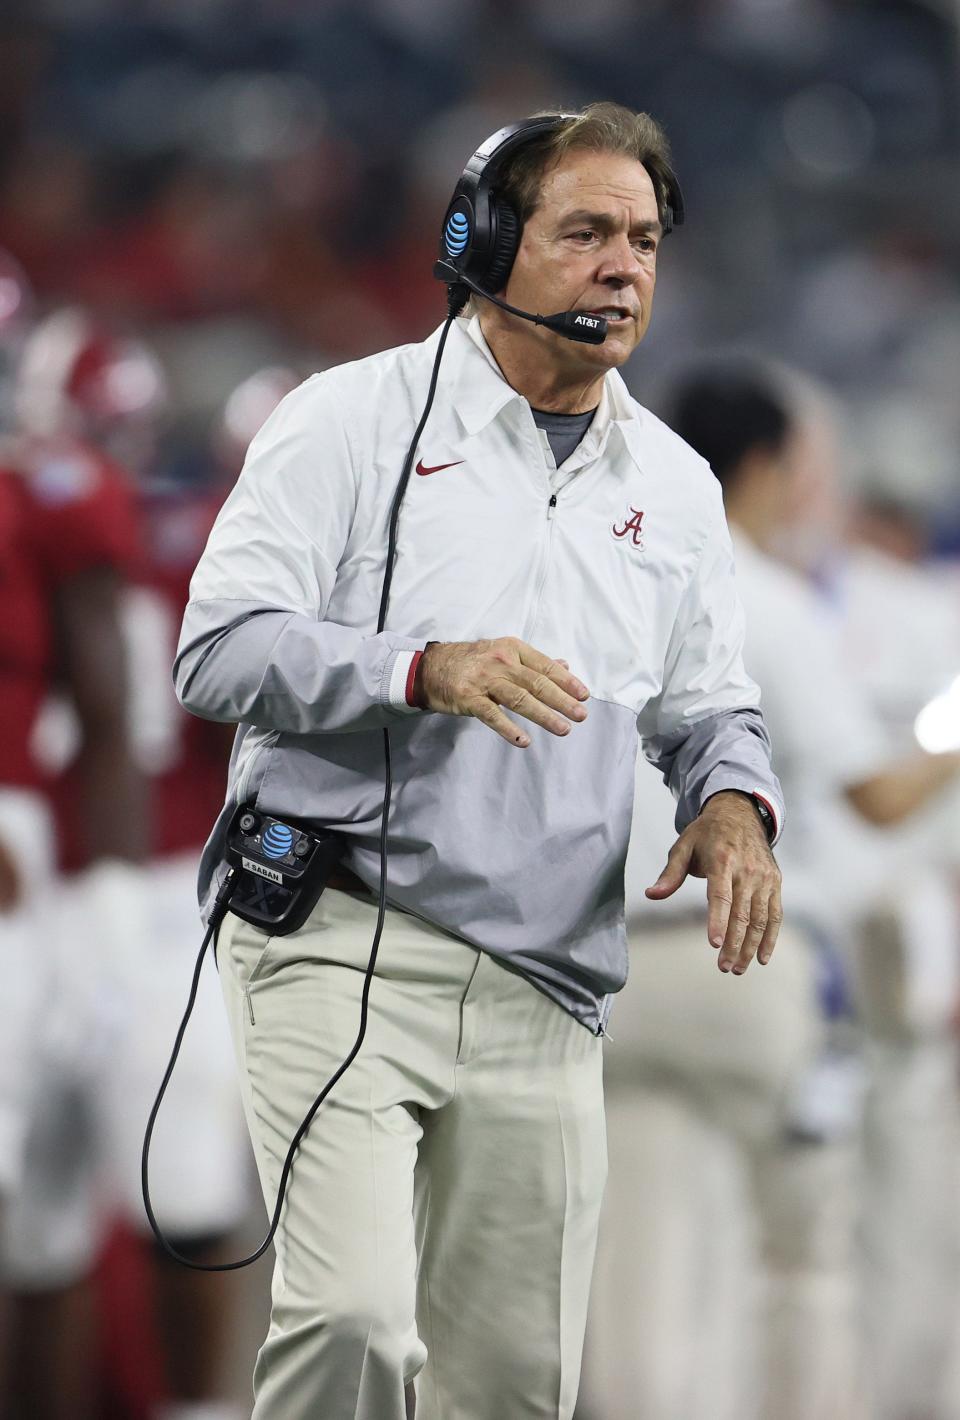 Former Alabama coach Nick Saban admitted part of the reason he retired is that his players were demanding to know how much NIL money that could make with the Crimson Tide.